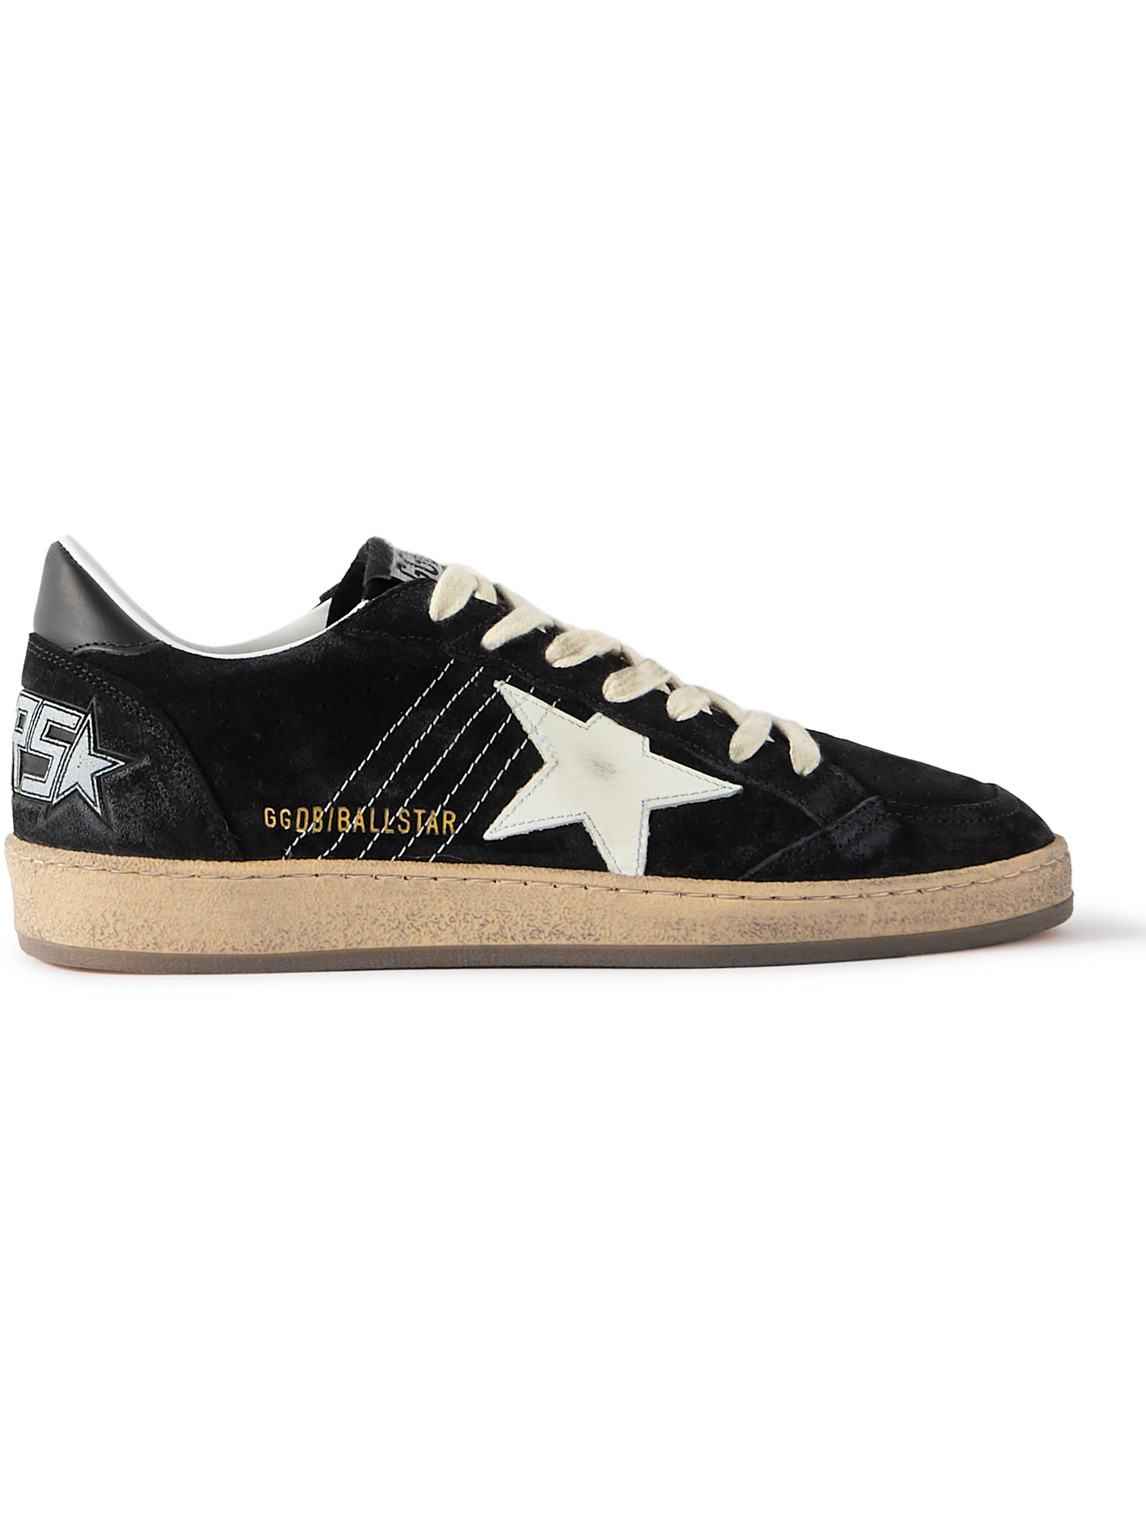 Shop Golden Goose Ball Star Distressed Suede And Leather Sneakers In Black